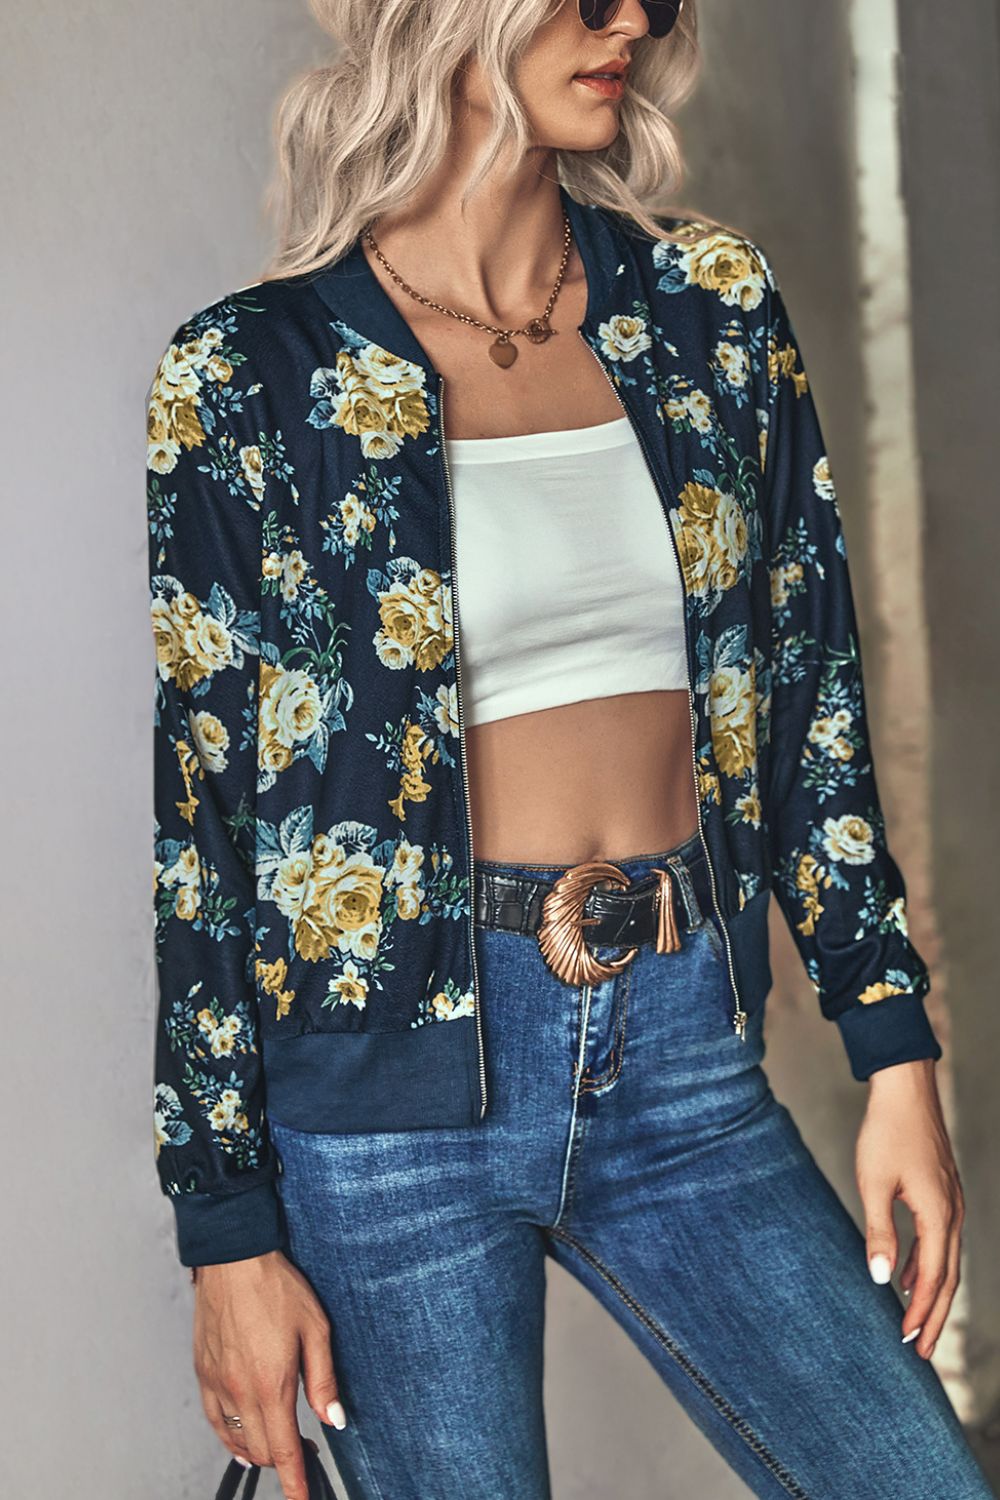 Blonde Woman wearing a navy blue floral zip up lightweight floral bomber jacket unzipped over a white tube top paired with belted denim blue jeans